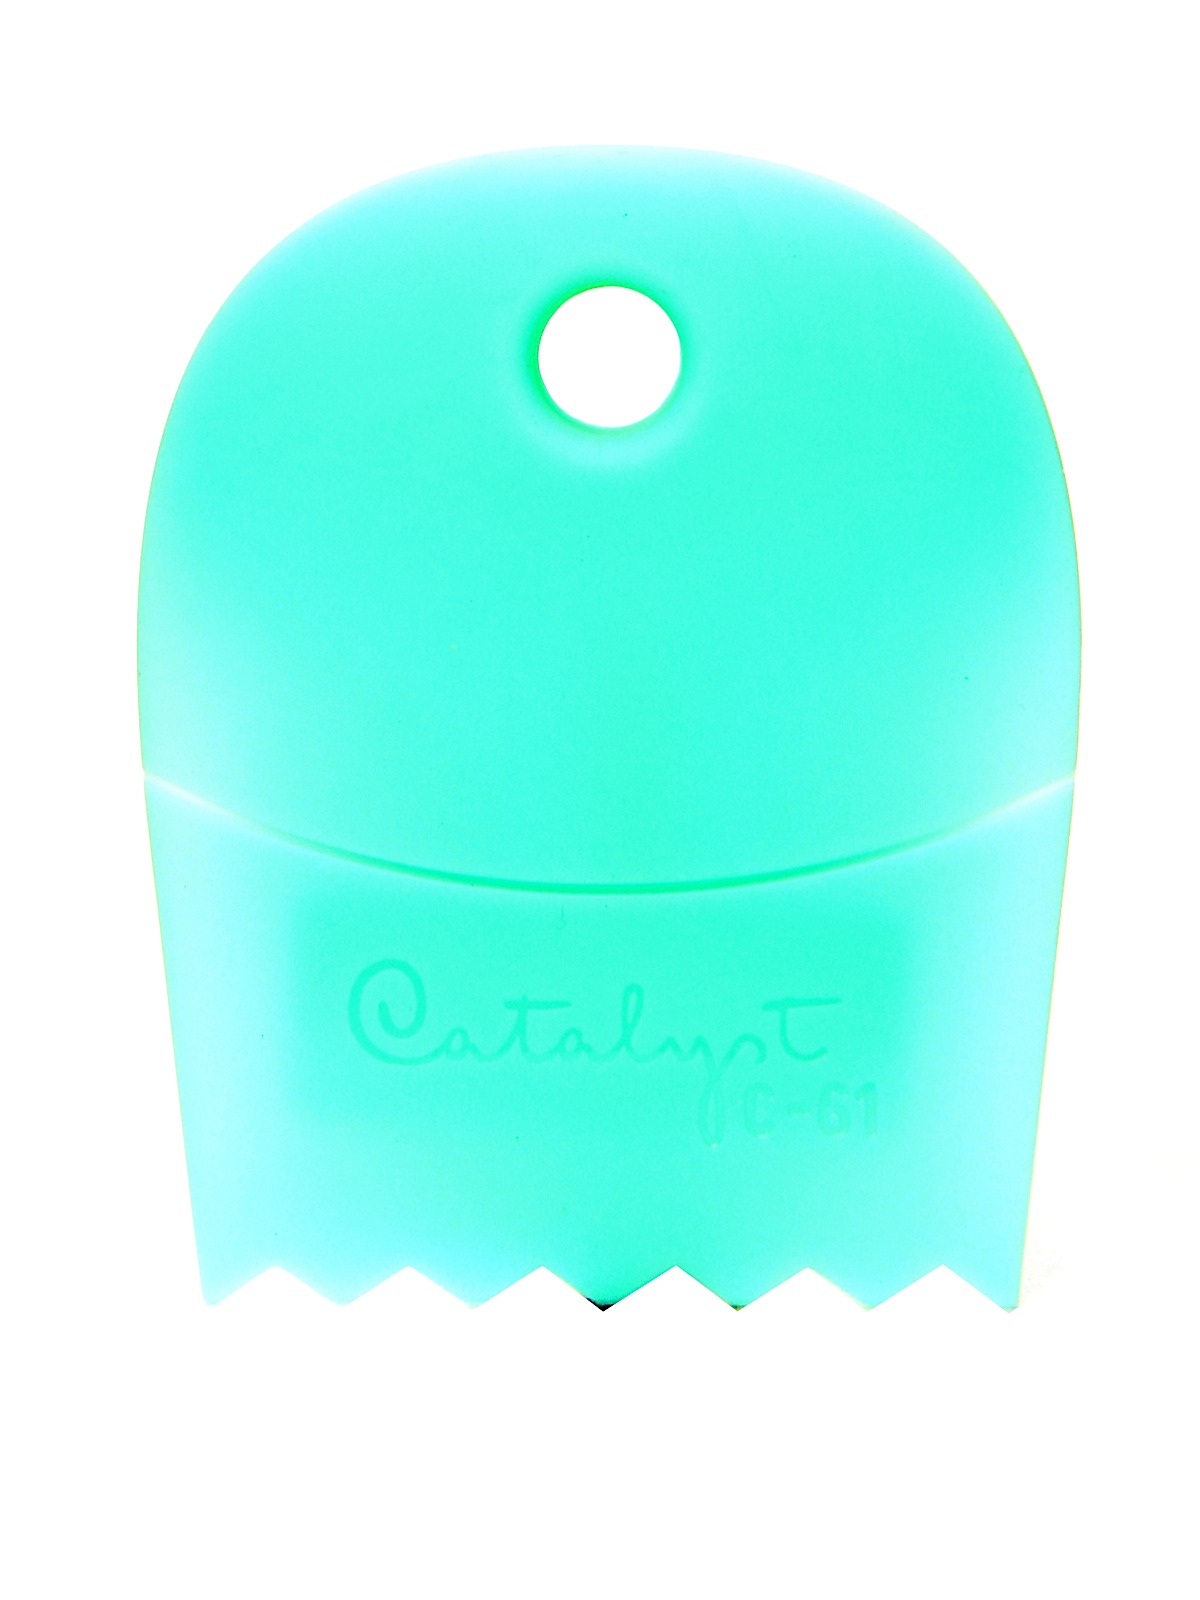 Catalyst Silicone Tools Contour No. 61 Mint